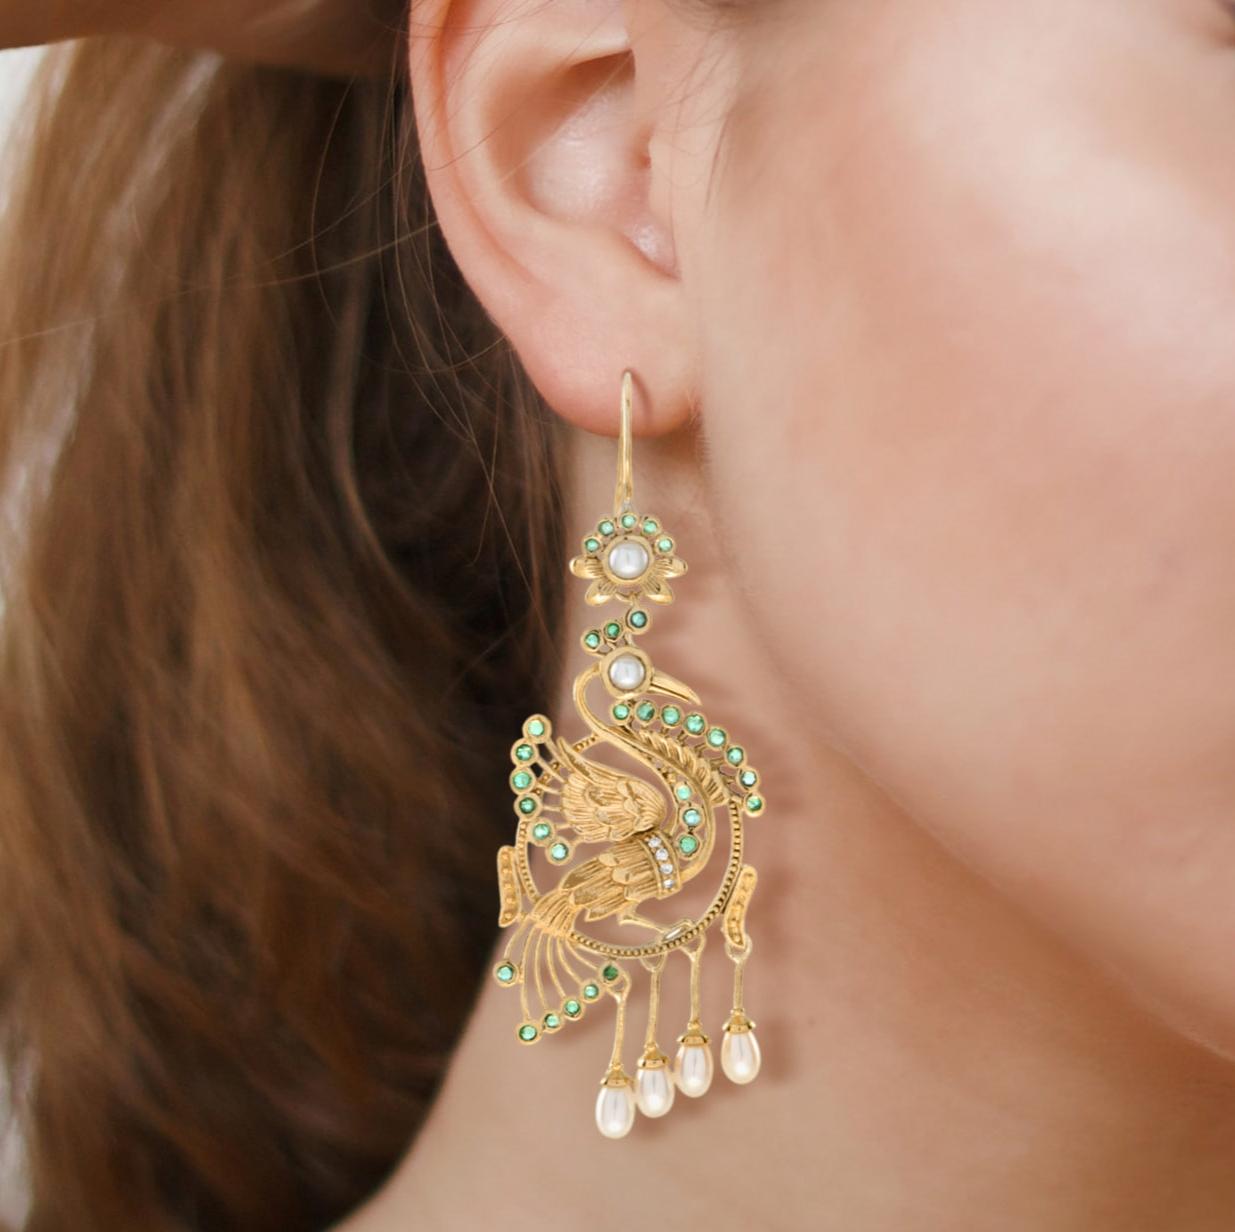 Let these beautiful birds bring you joy in more way than one. The peacock represents happiness. Dangle our Peacock Earrings from your lobes as exotic statement pieces. These detailed and layered earrings are in 14k yellow gold. The earrings feature